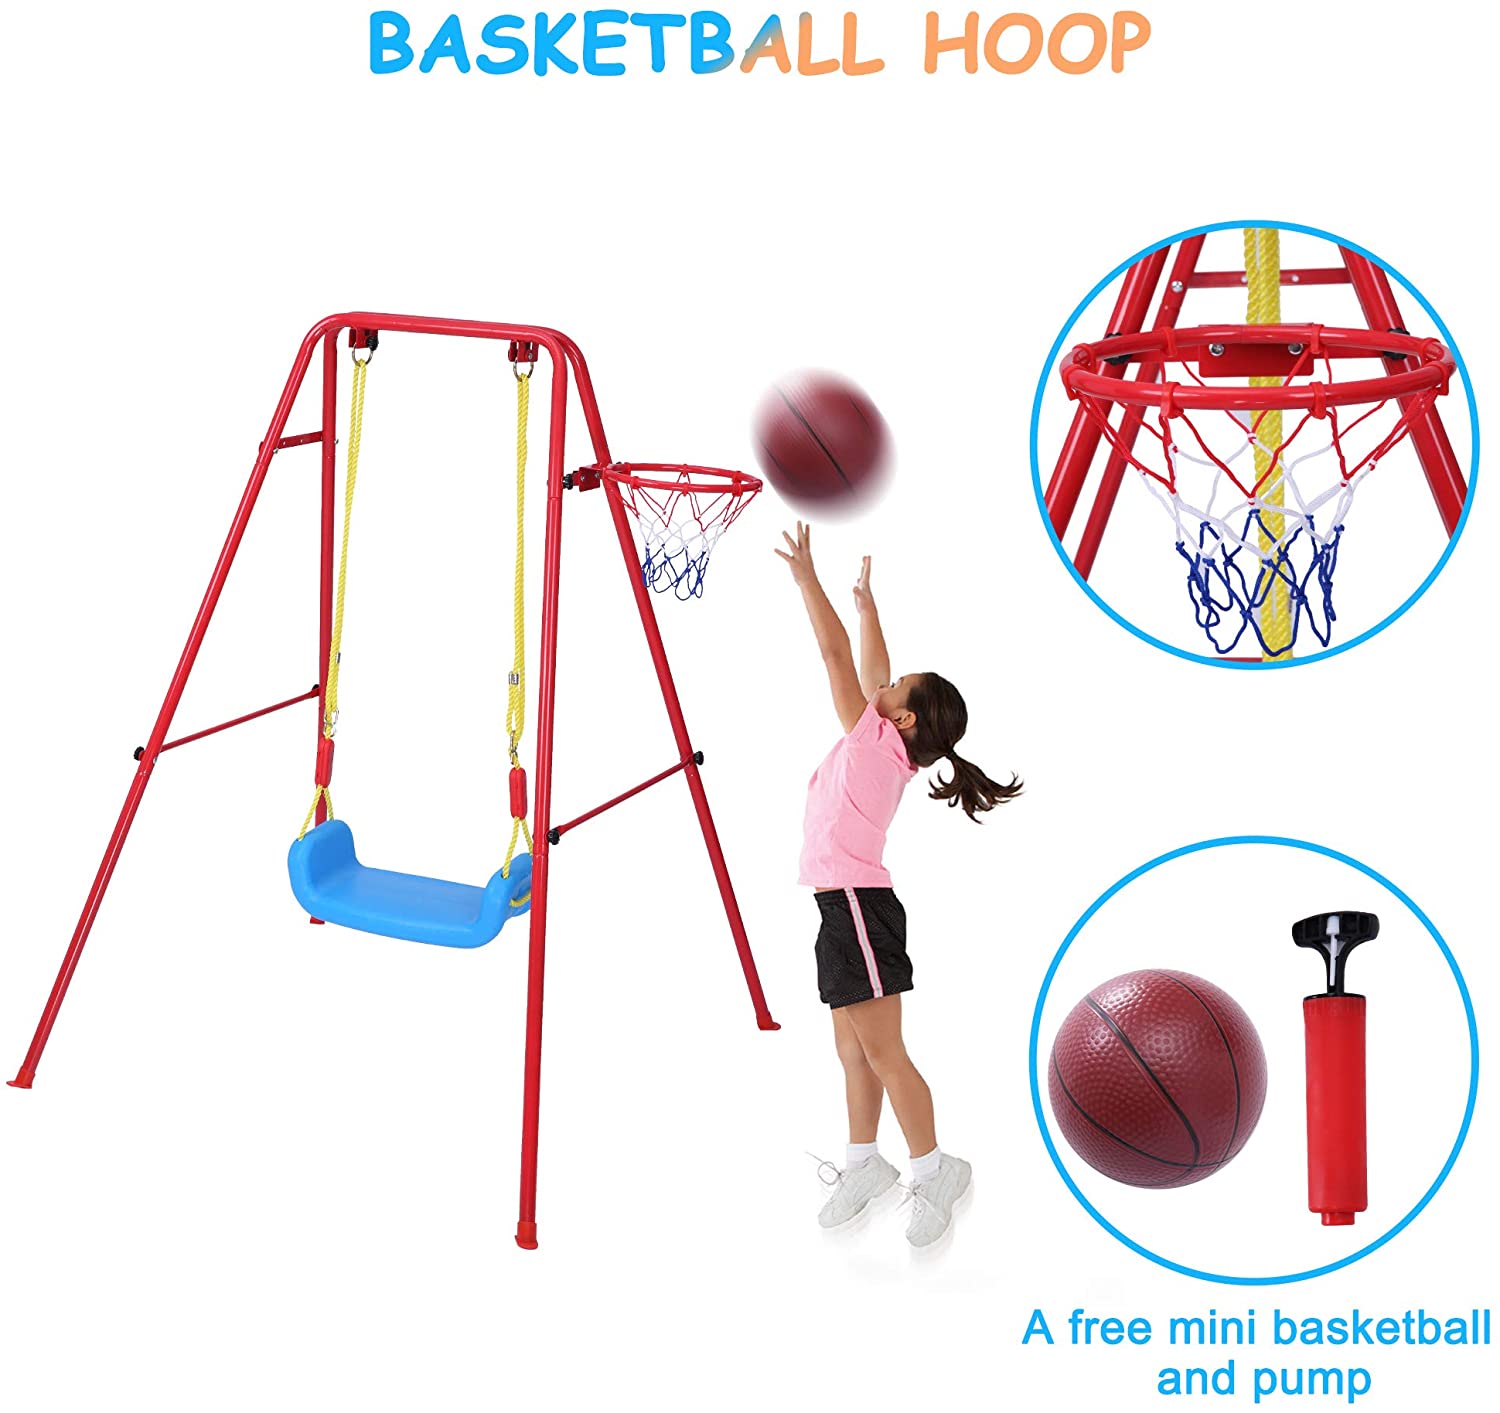 Toddler Swing Playset | 2 in 1 Swing Basketball Combination Swing Toys Set Indoor and Outdoor Playground Swing Seat for Kids Boys Girls (Bench)